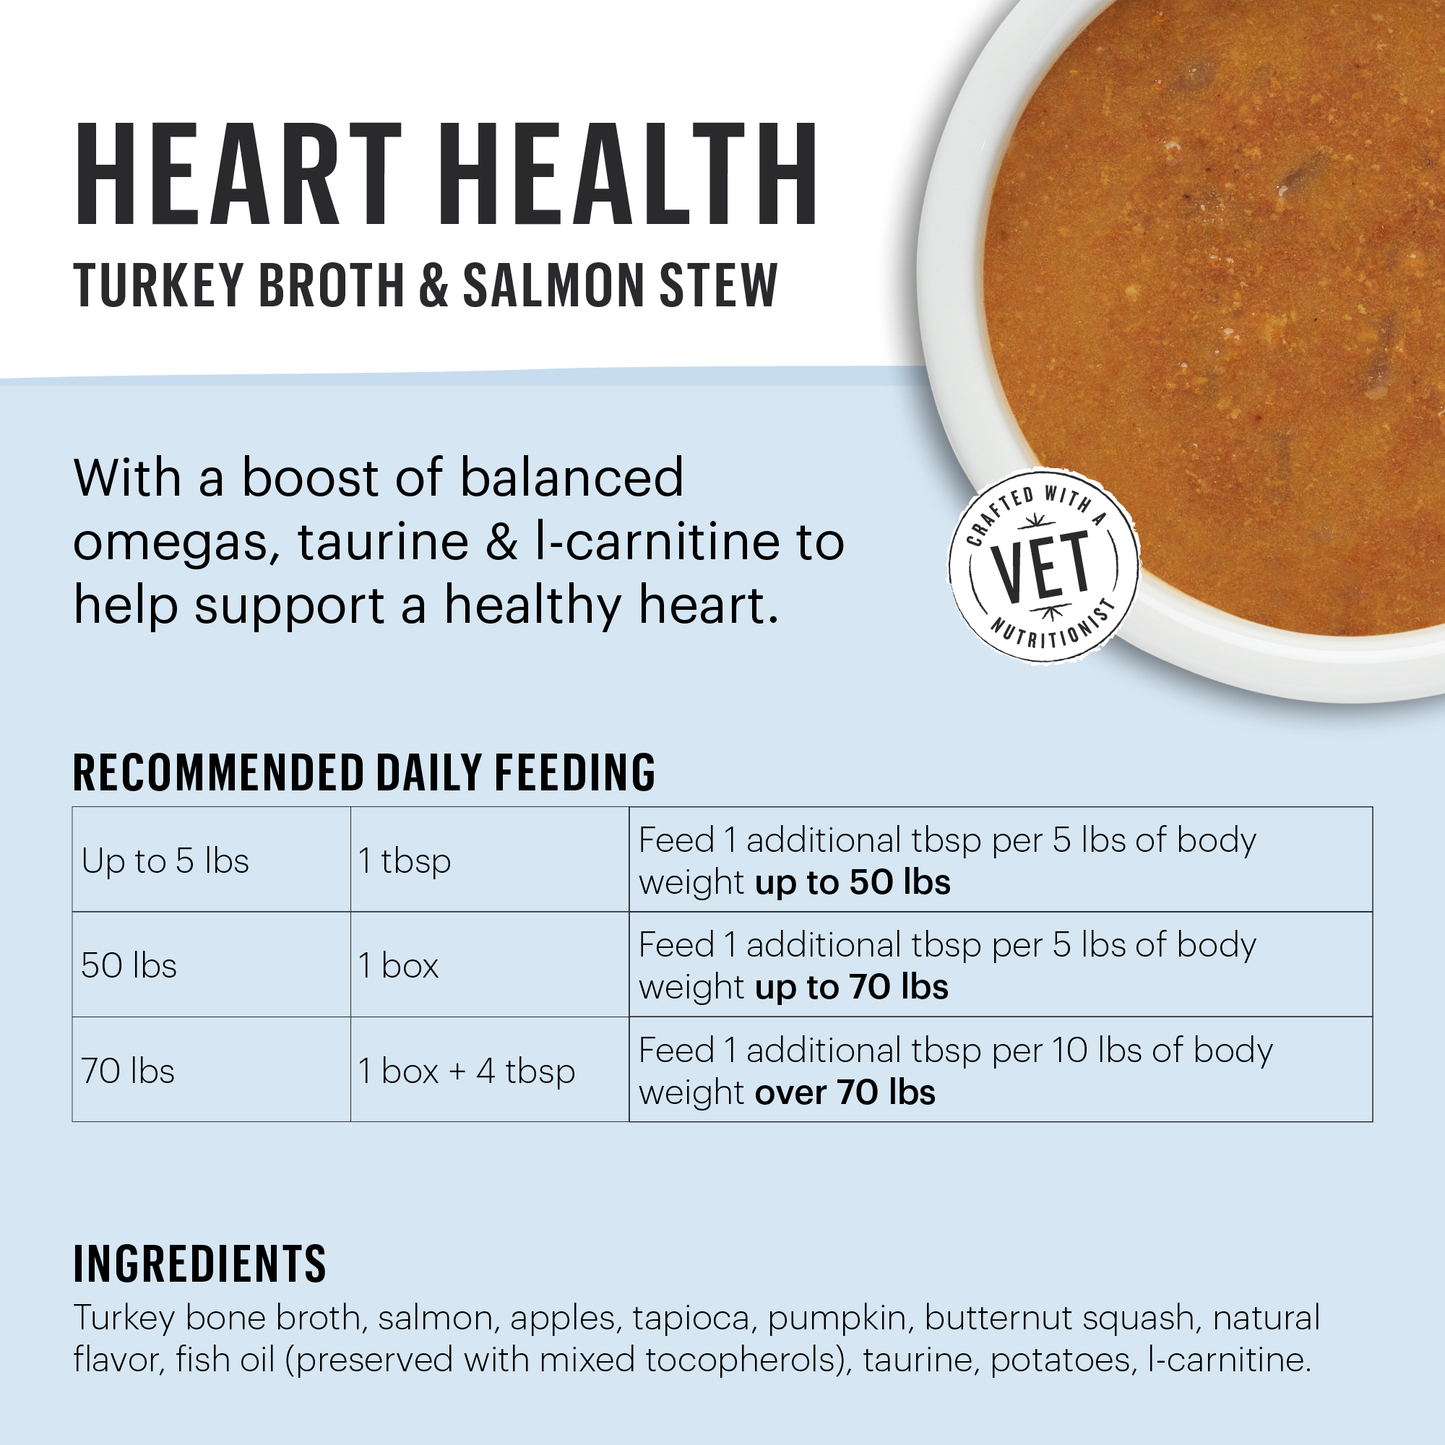 Functional Pour Overs:  Heart Health - Turkey Broth & Salmon Stew